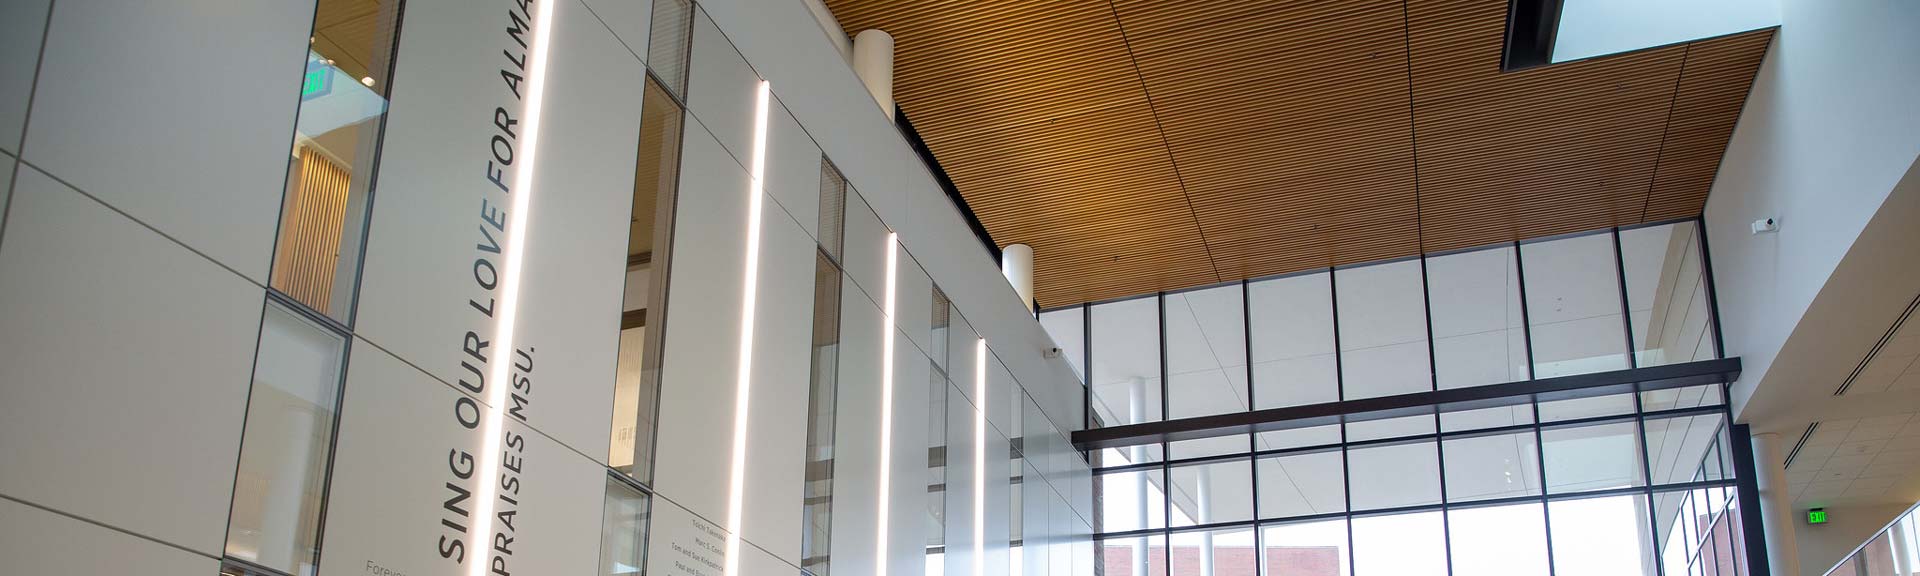 Ceiling inside the entrance of the Edward J. Minskoff Pavilion at the MSU Broad College of Business